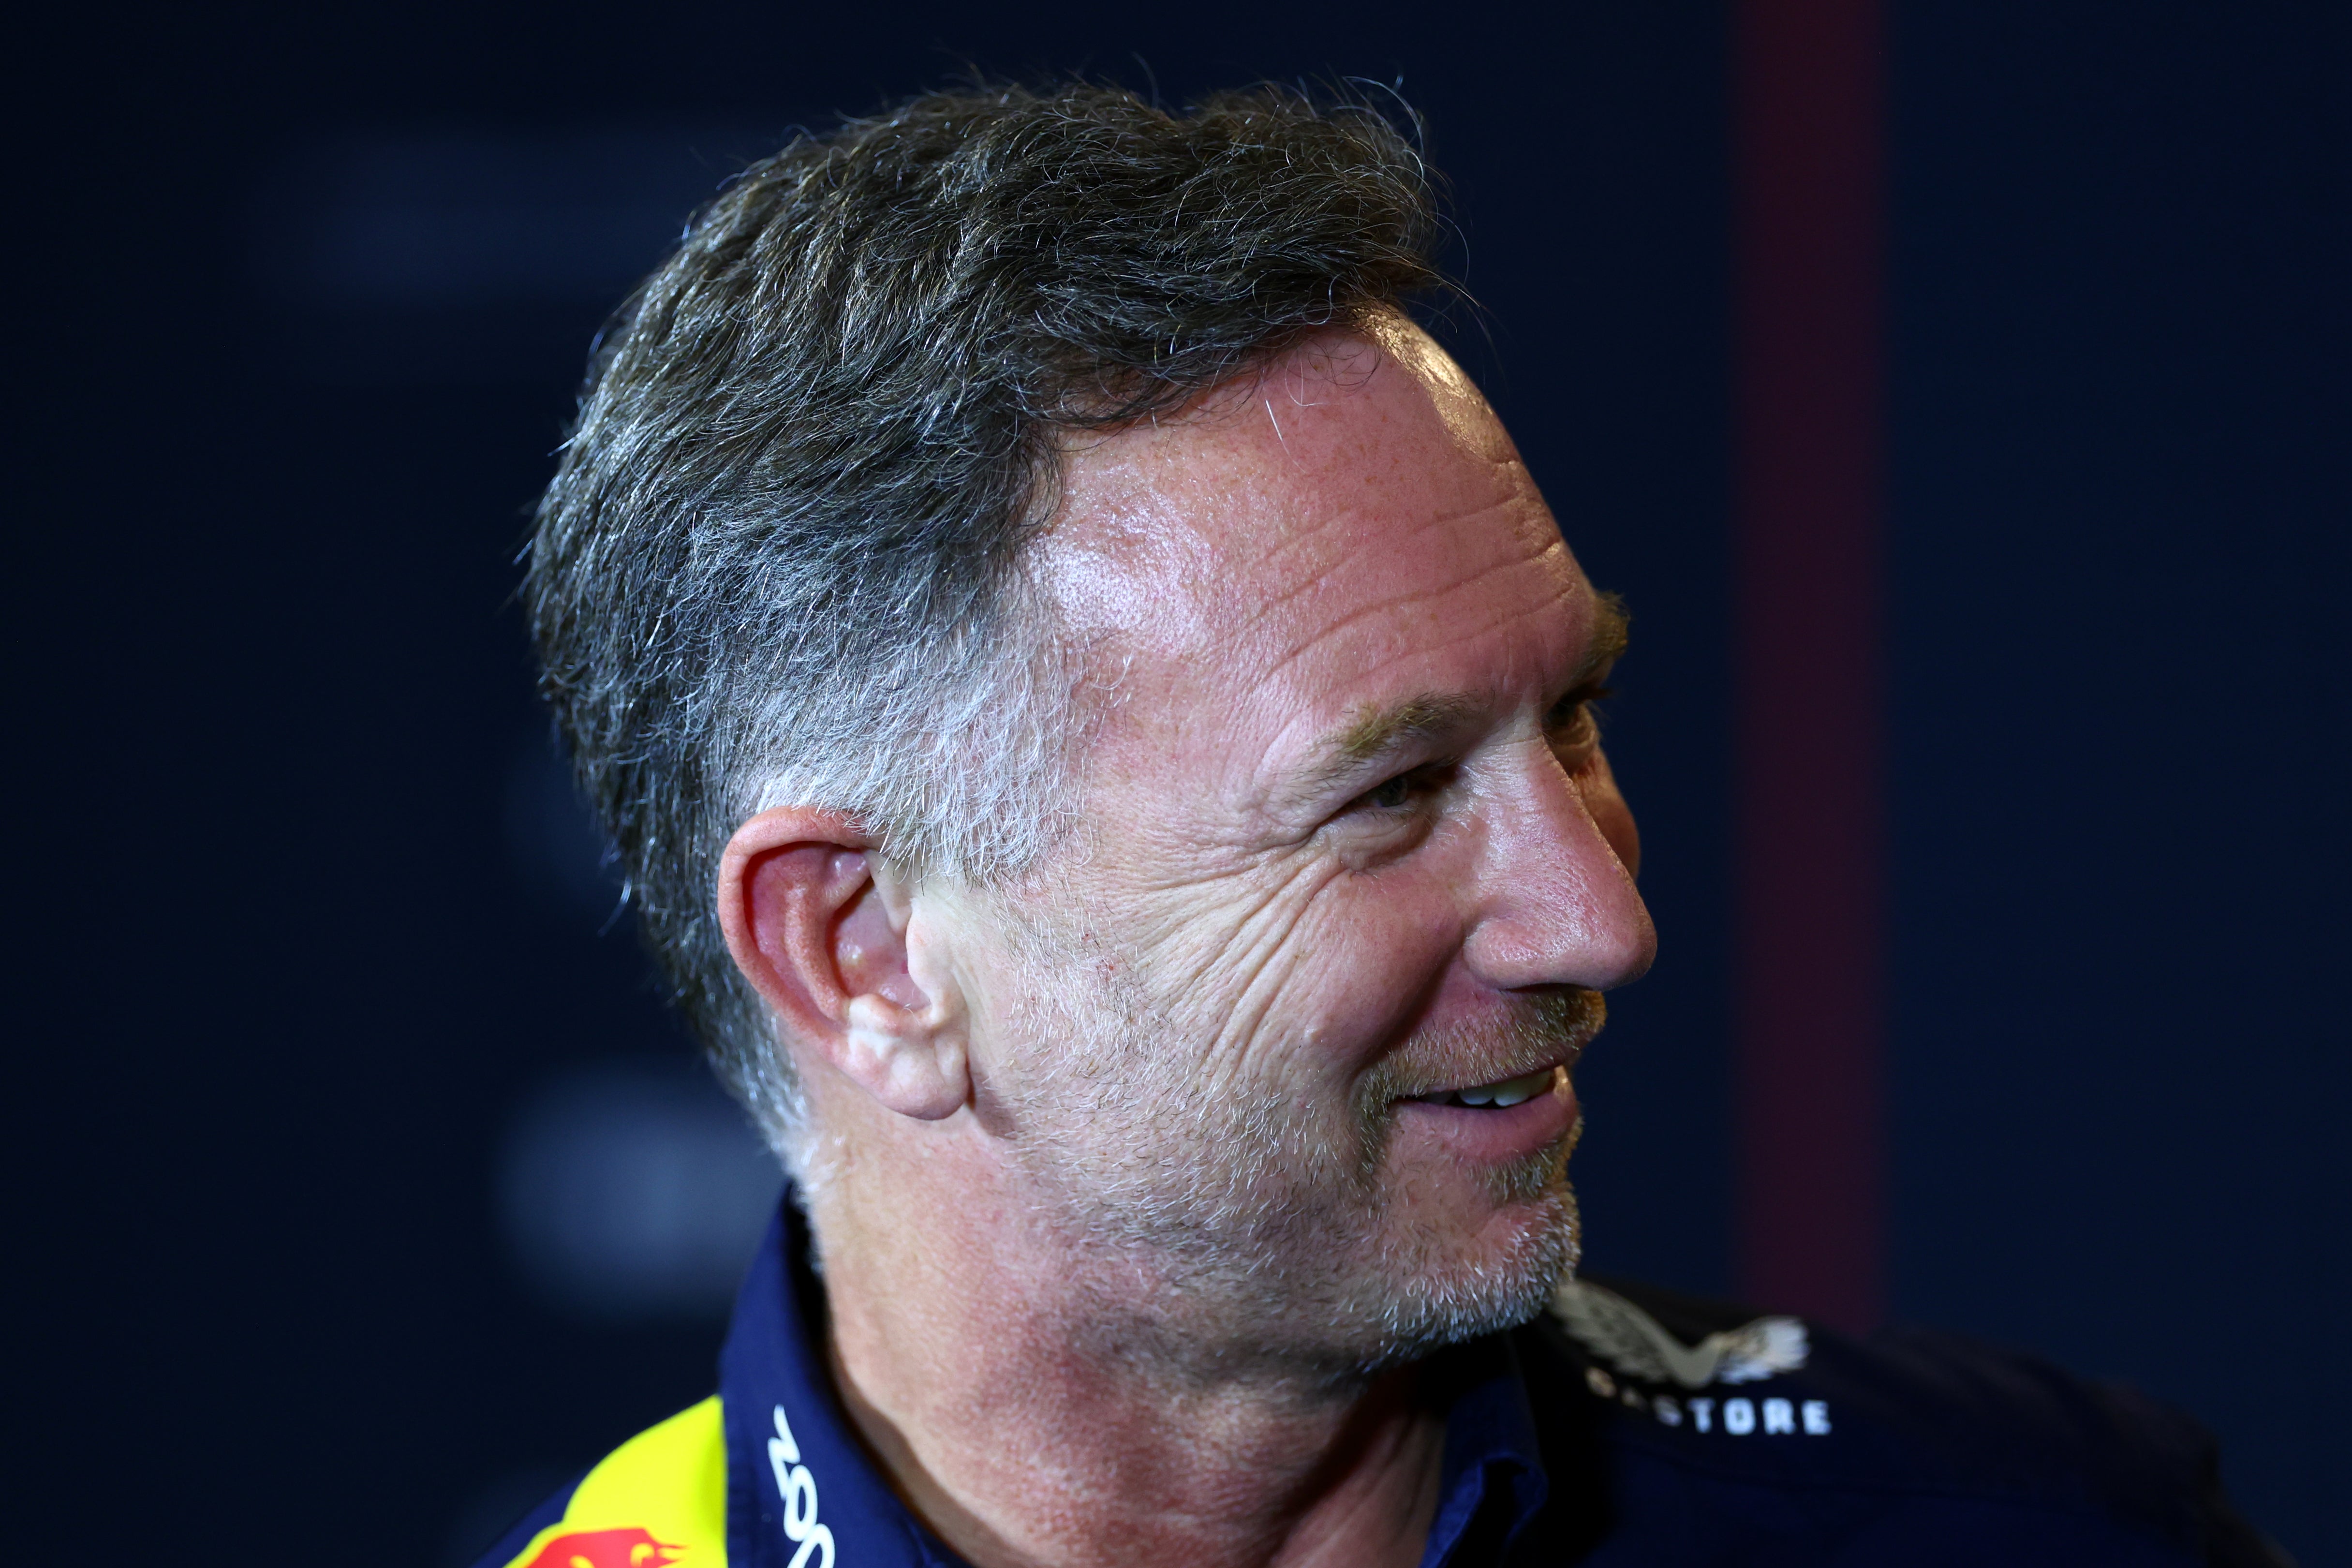 Christian Horner says Red Bull did not make an official complaint about Toto and Susie Wolff